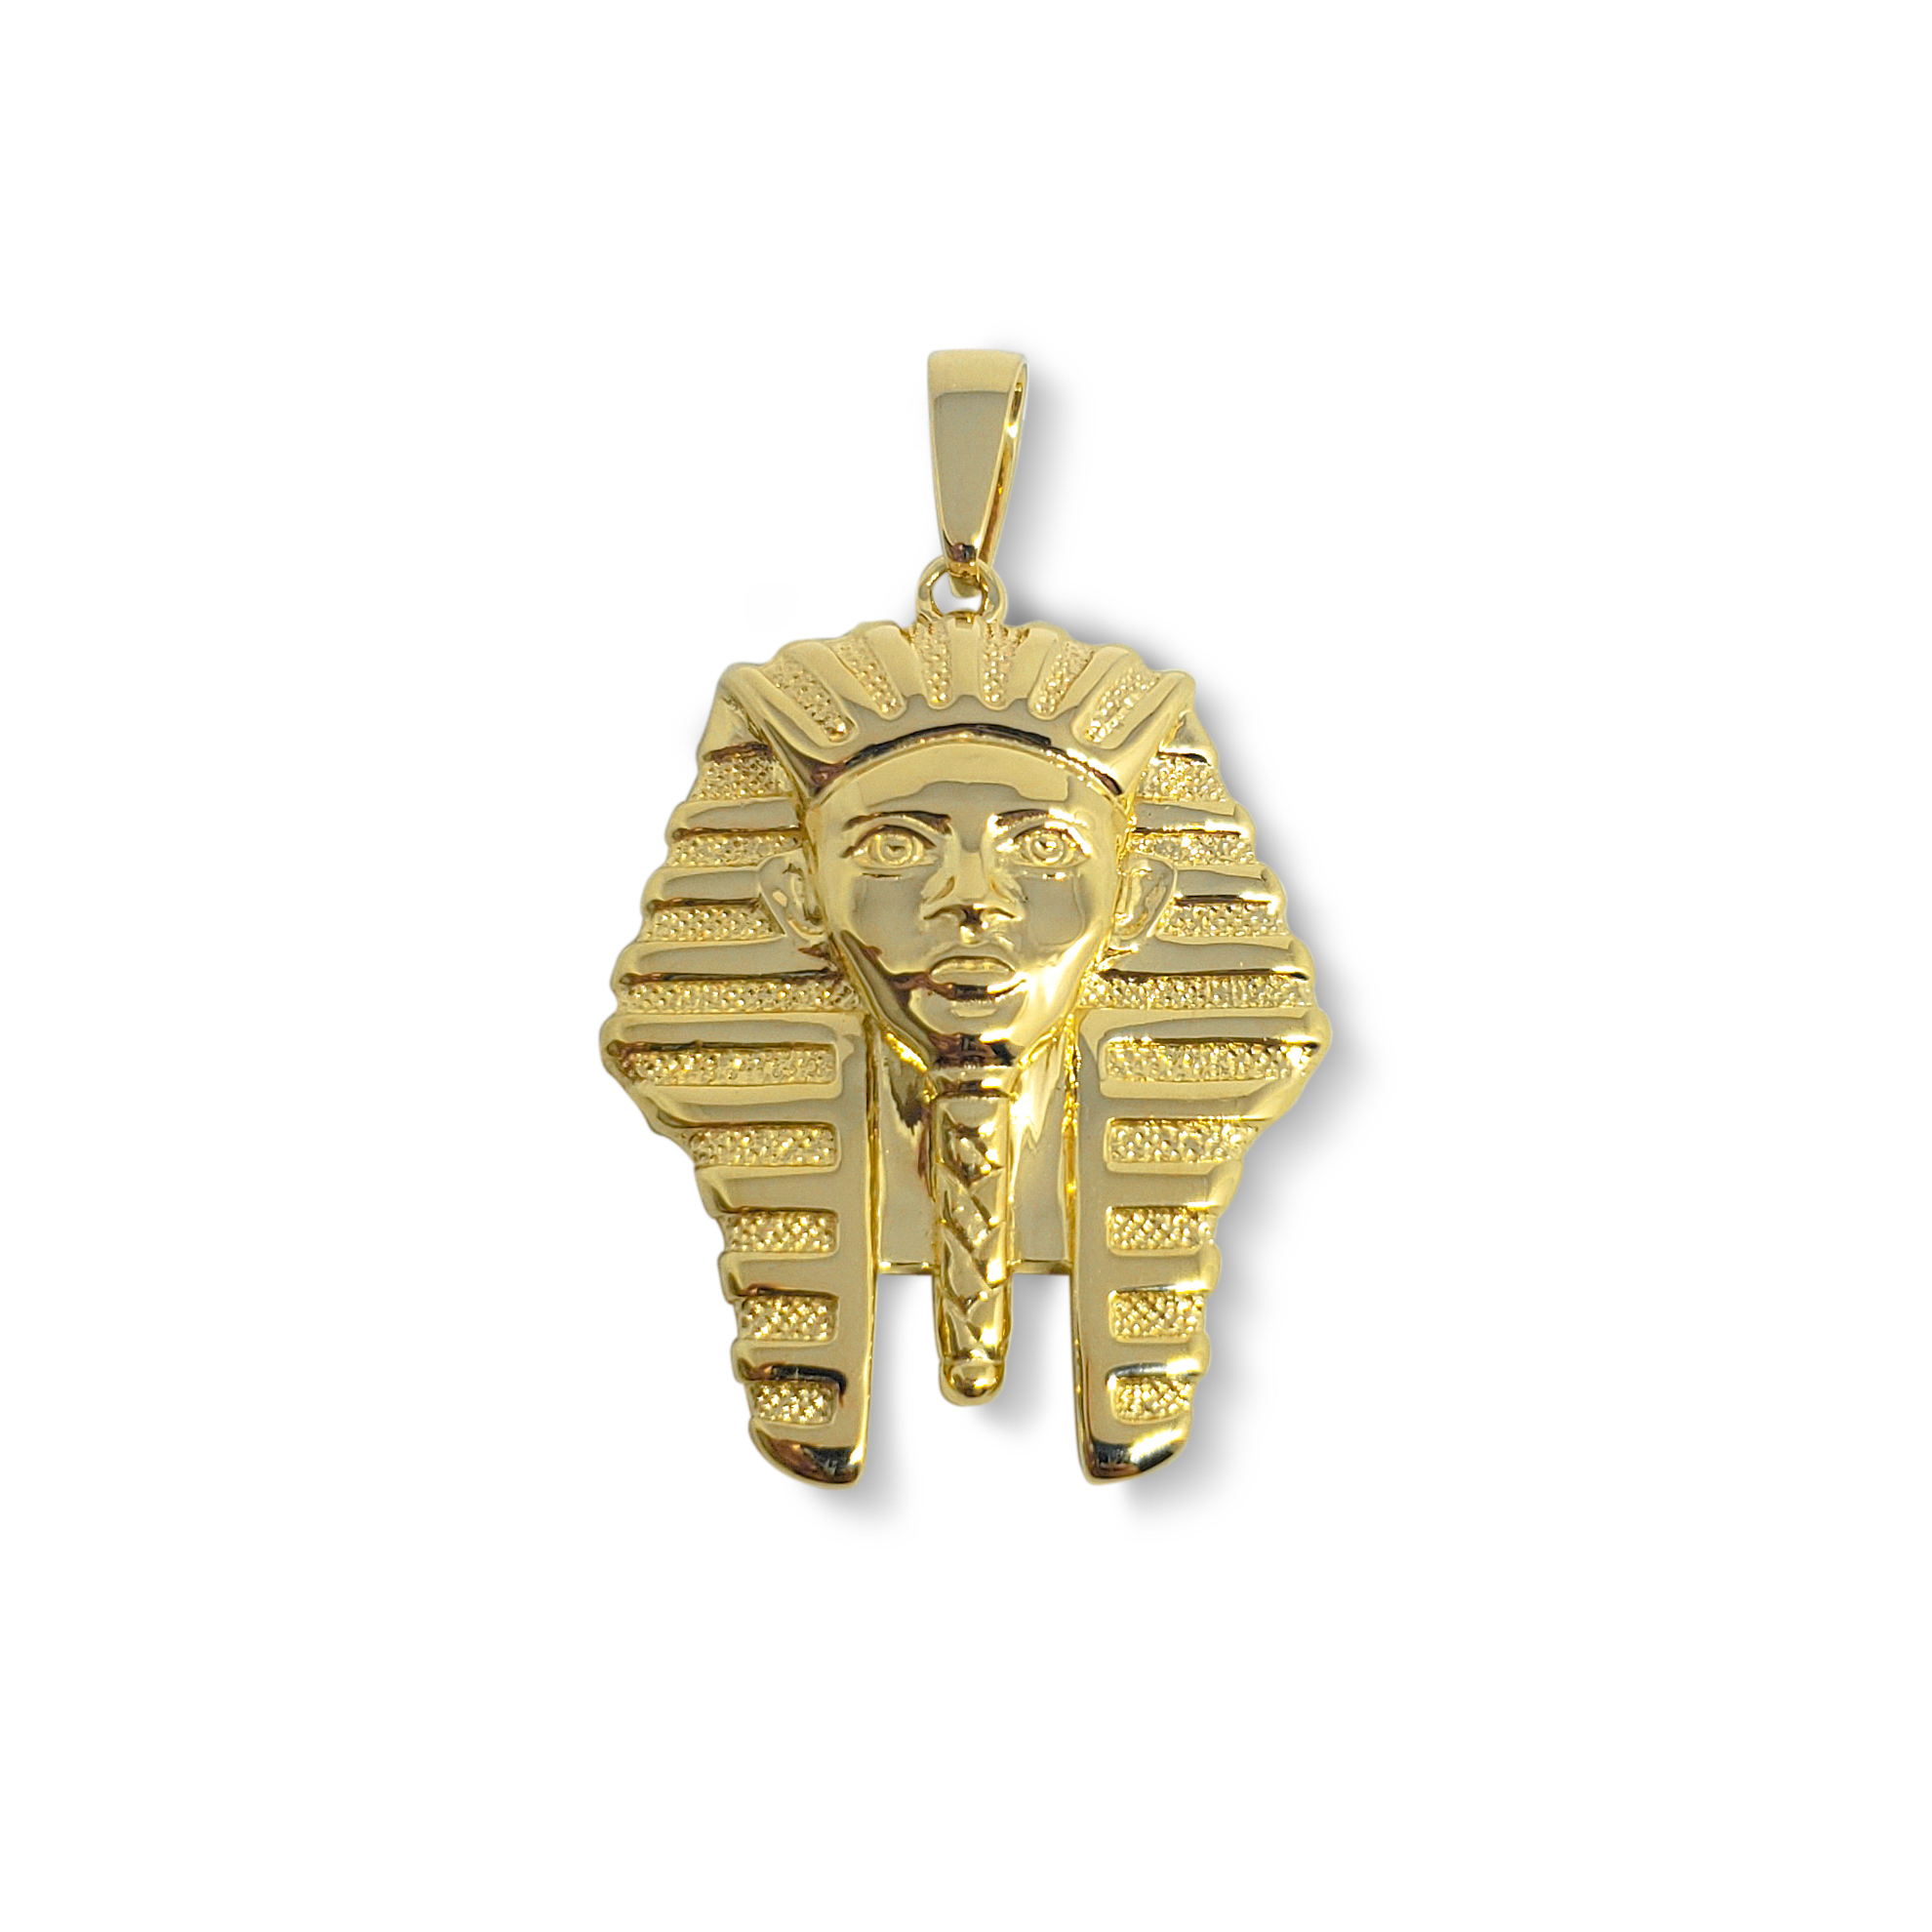 Solid 18K Yellow White or Rose Gold King Tut Pendant Gold King Tut Jewelry, 8.2 Grams